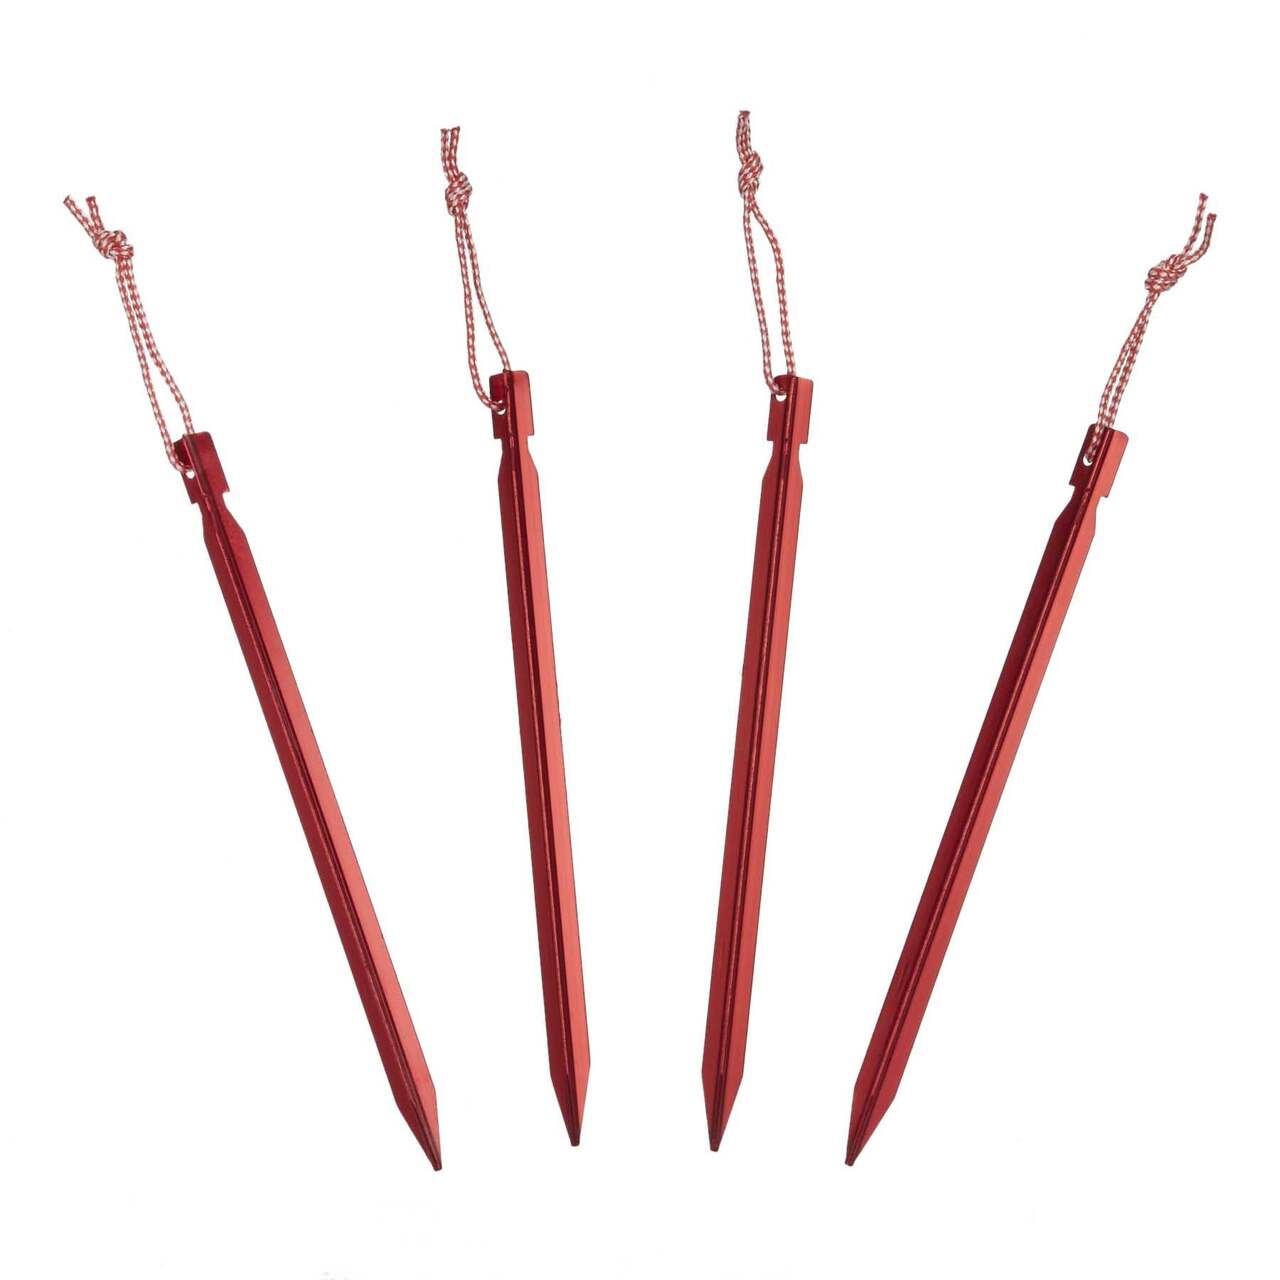 Woods Aluminium Y-Beam Tent Pegs/Stakes w/ Cords For Camping Tents & Tarps,  9-in, 4-pk